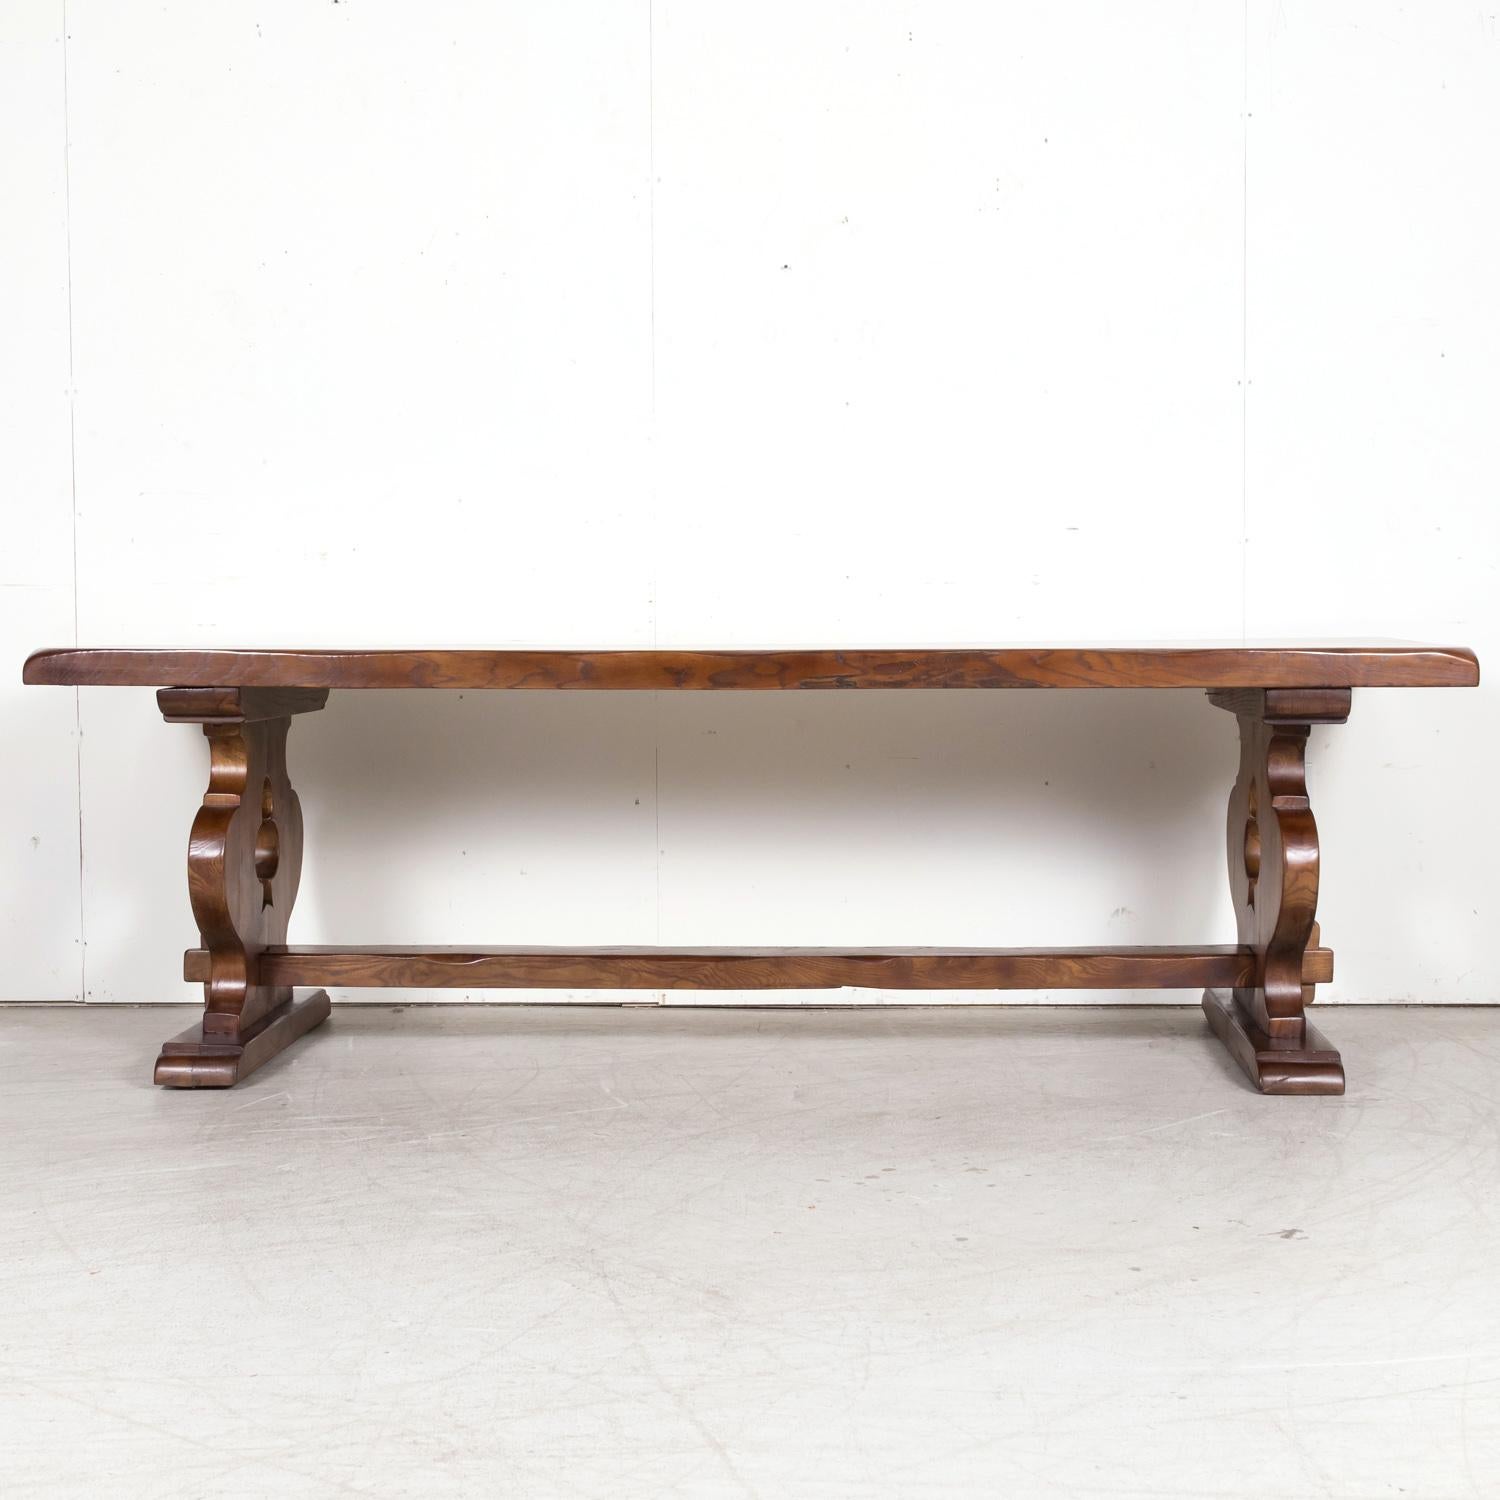 19th Century French Provincial Solid Chestnut Trestle Dining Table For Sale 1